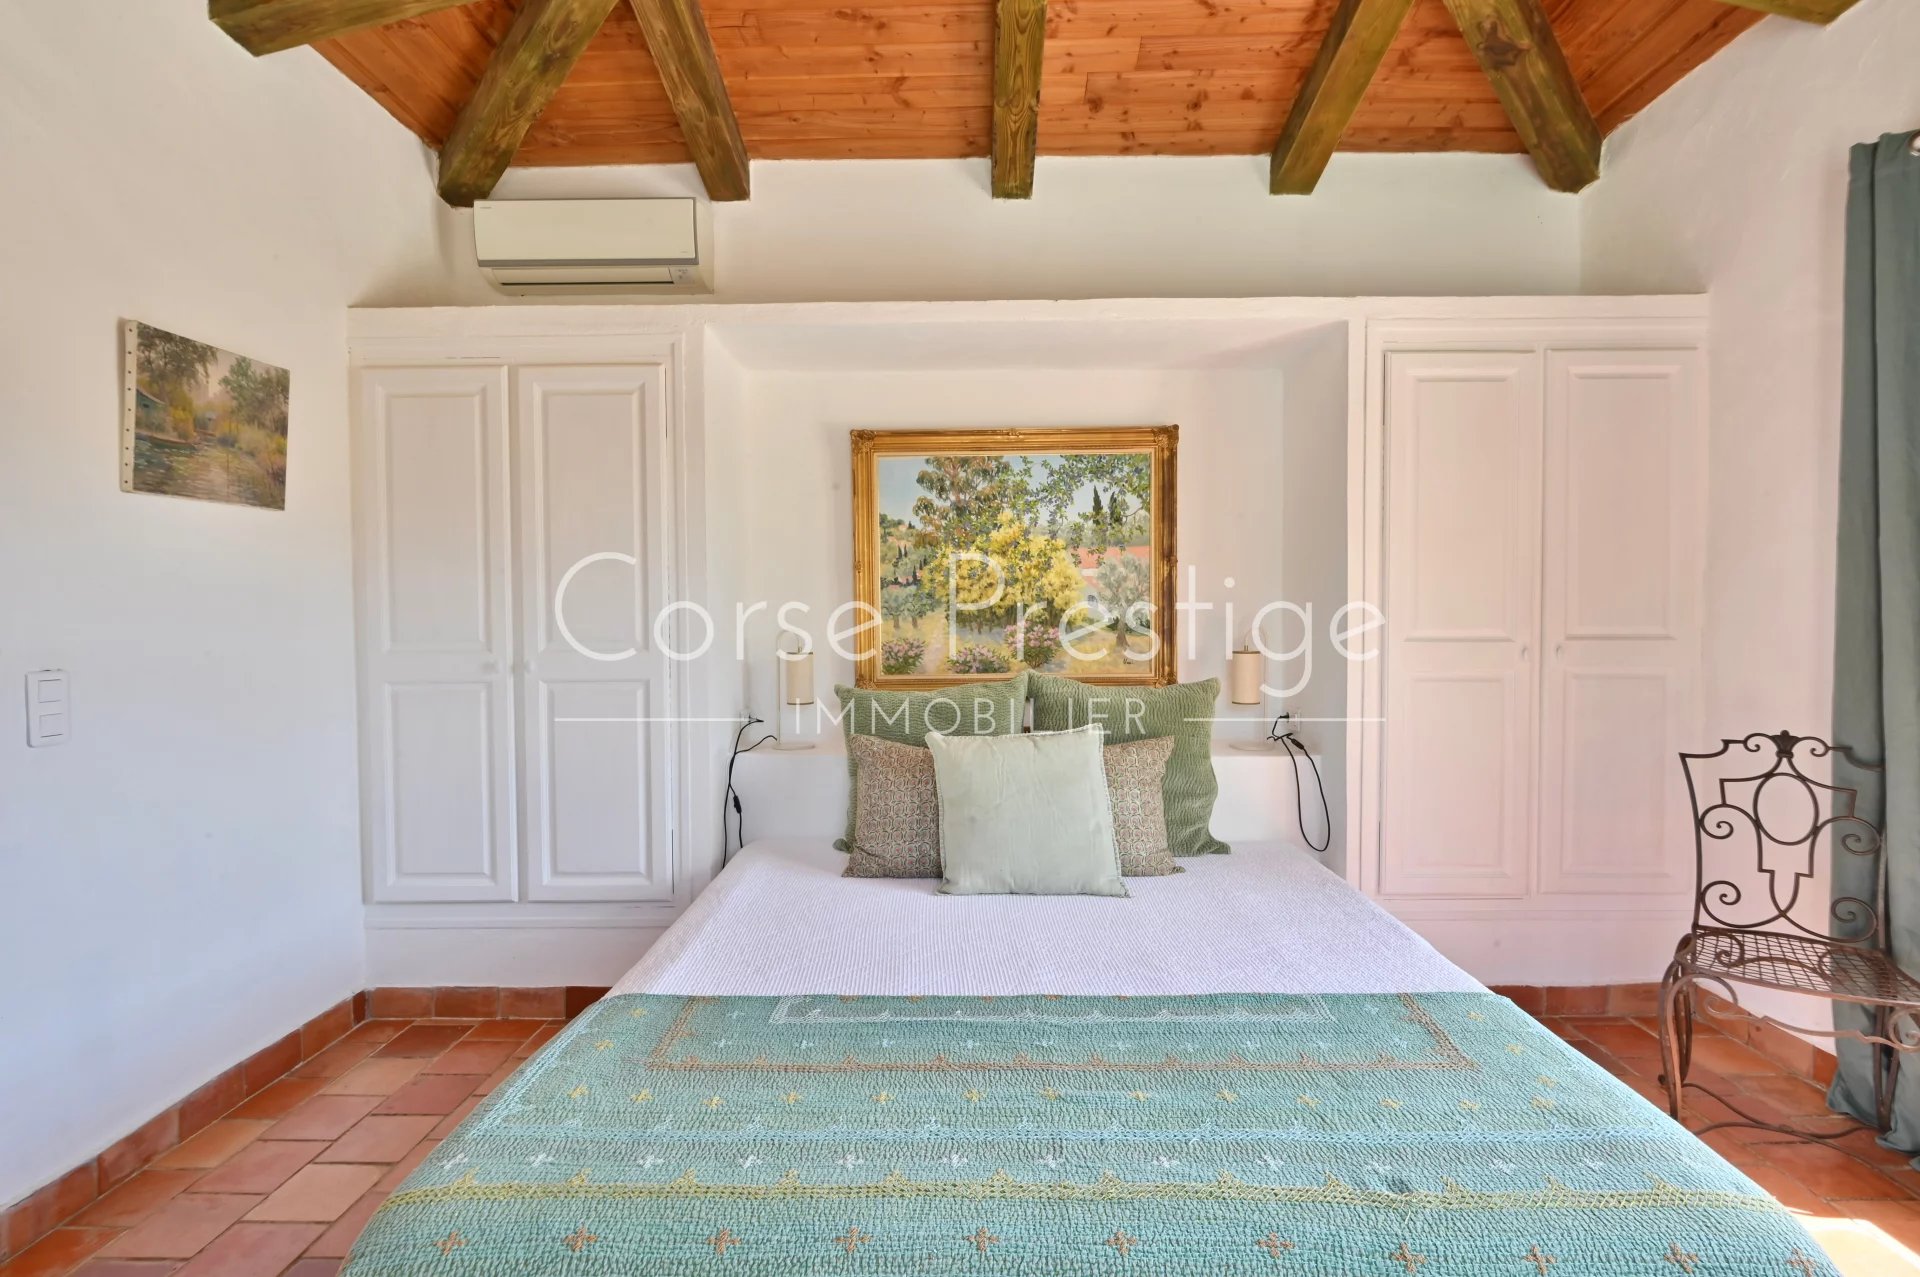 sheepfold to rent in bonifacio - away from prying eyes - south corsica image7